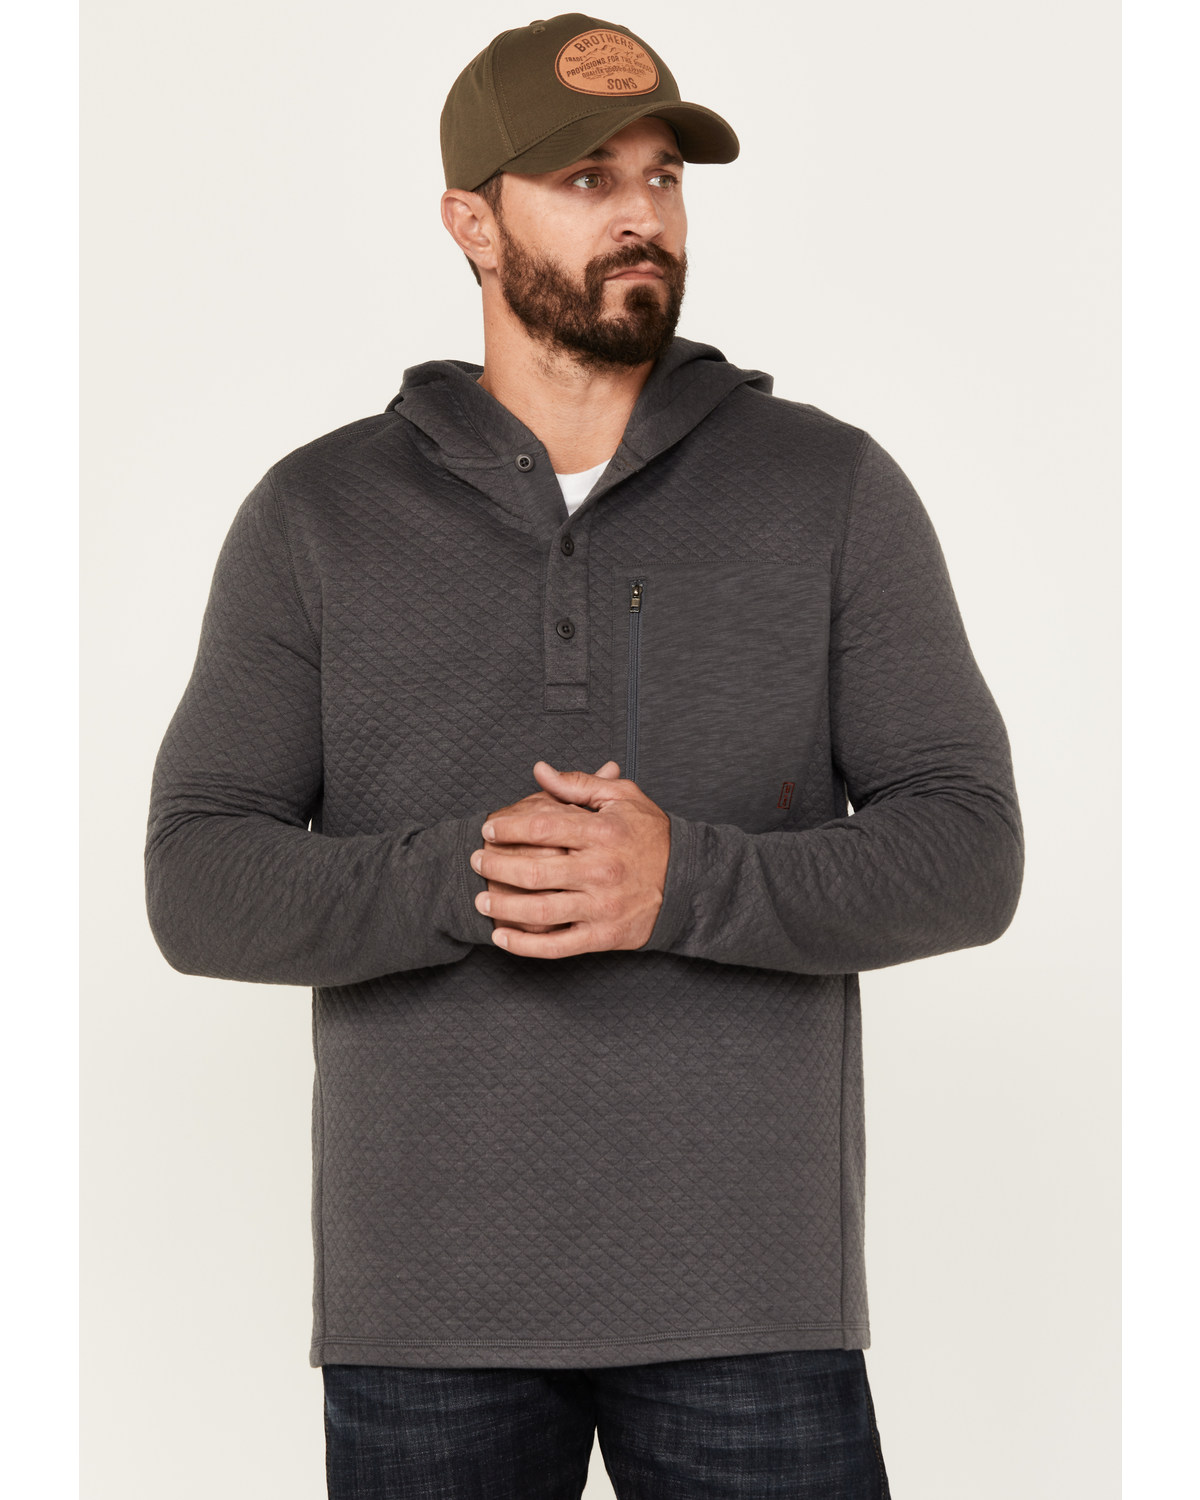 Brothers and Sons Men's Quilted Button-Down Hooded Pullover